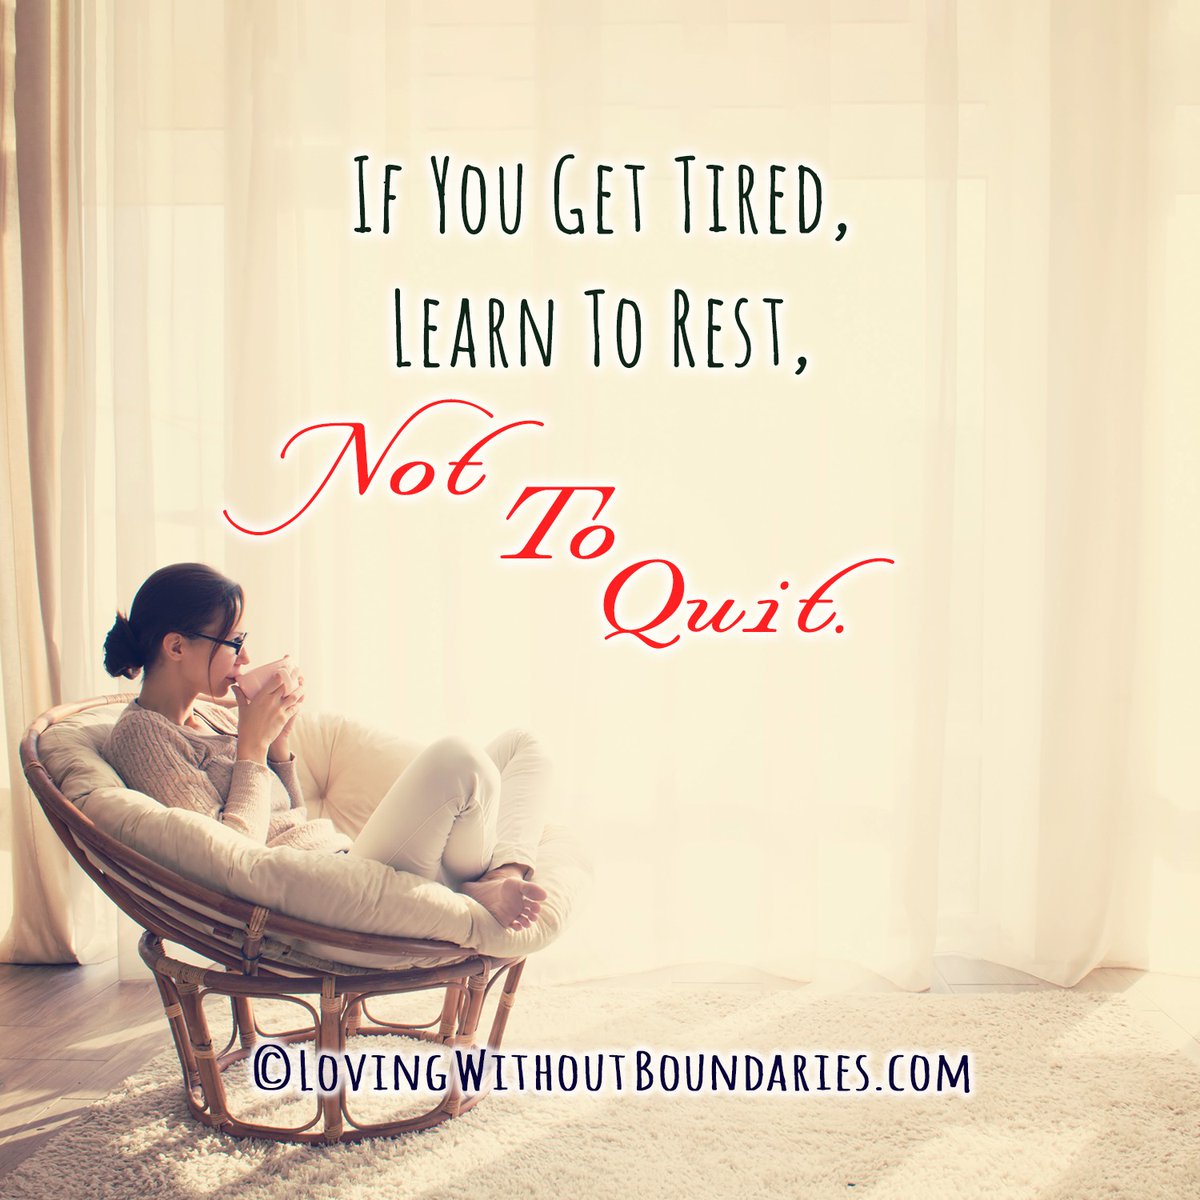 If You Get Tired, Learn To Rest, Not To Quit.
Poster created with love by Kitty Chambliss.

Sign up at buff.ly/38R7cr9 for sexy content and alternative relationship talk! Curious? Find out more!
#polycoach #relationshipcoach #openrelationship